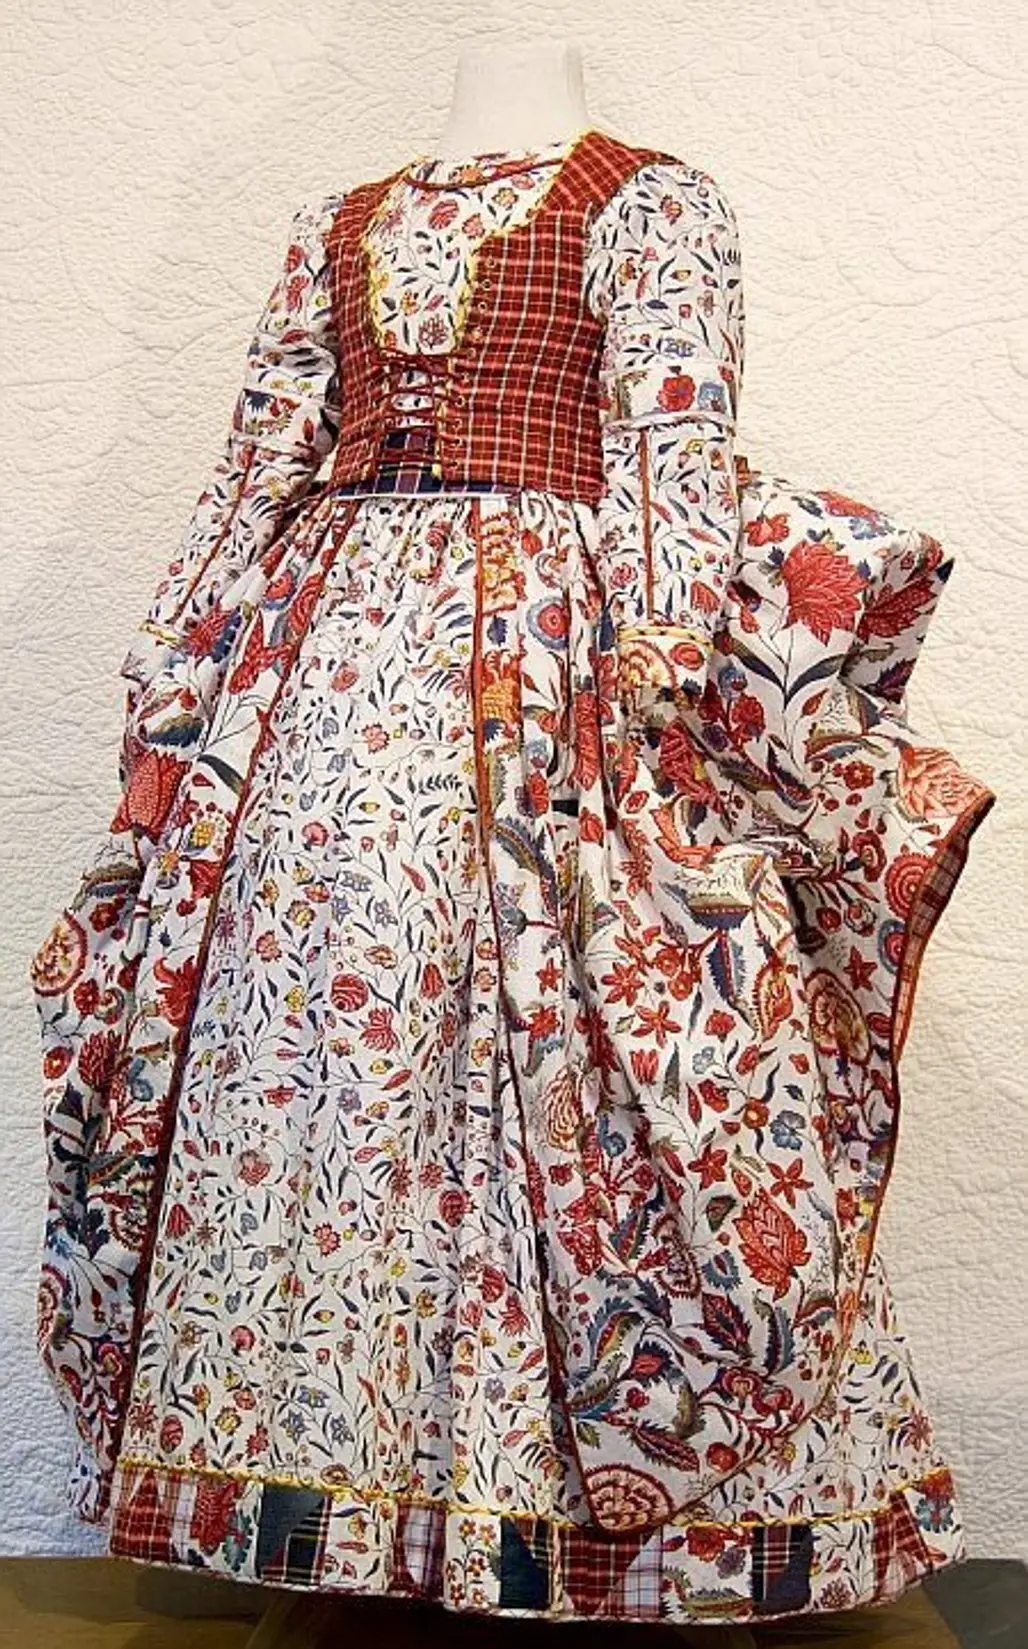 18th Century Dutch Dress Influenced by Those Indian Fabrics I Mentioned